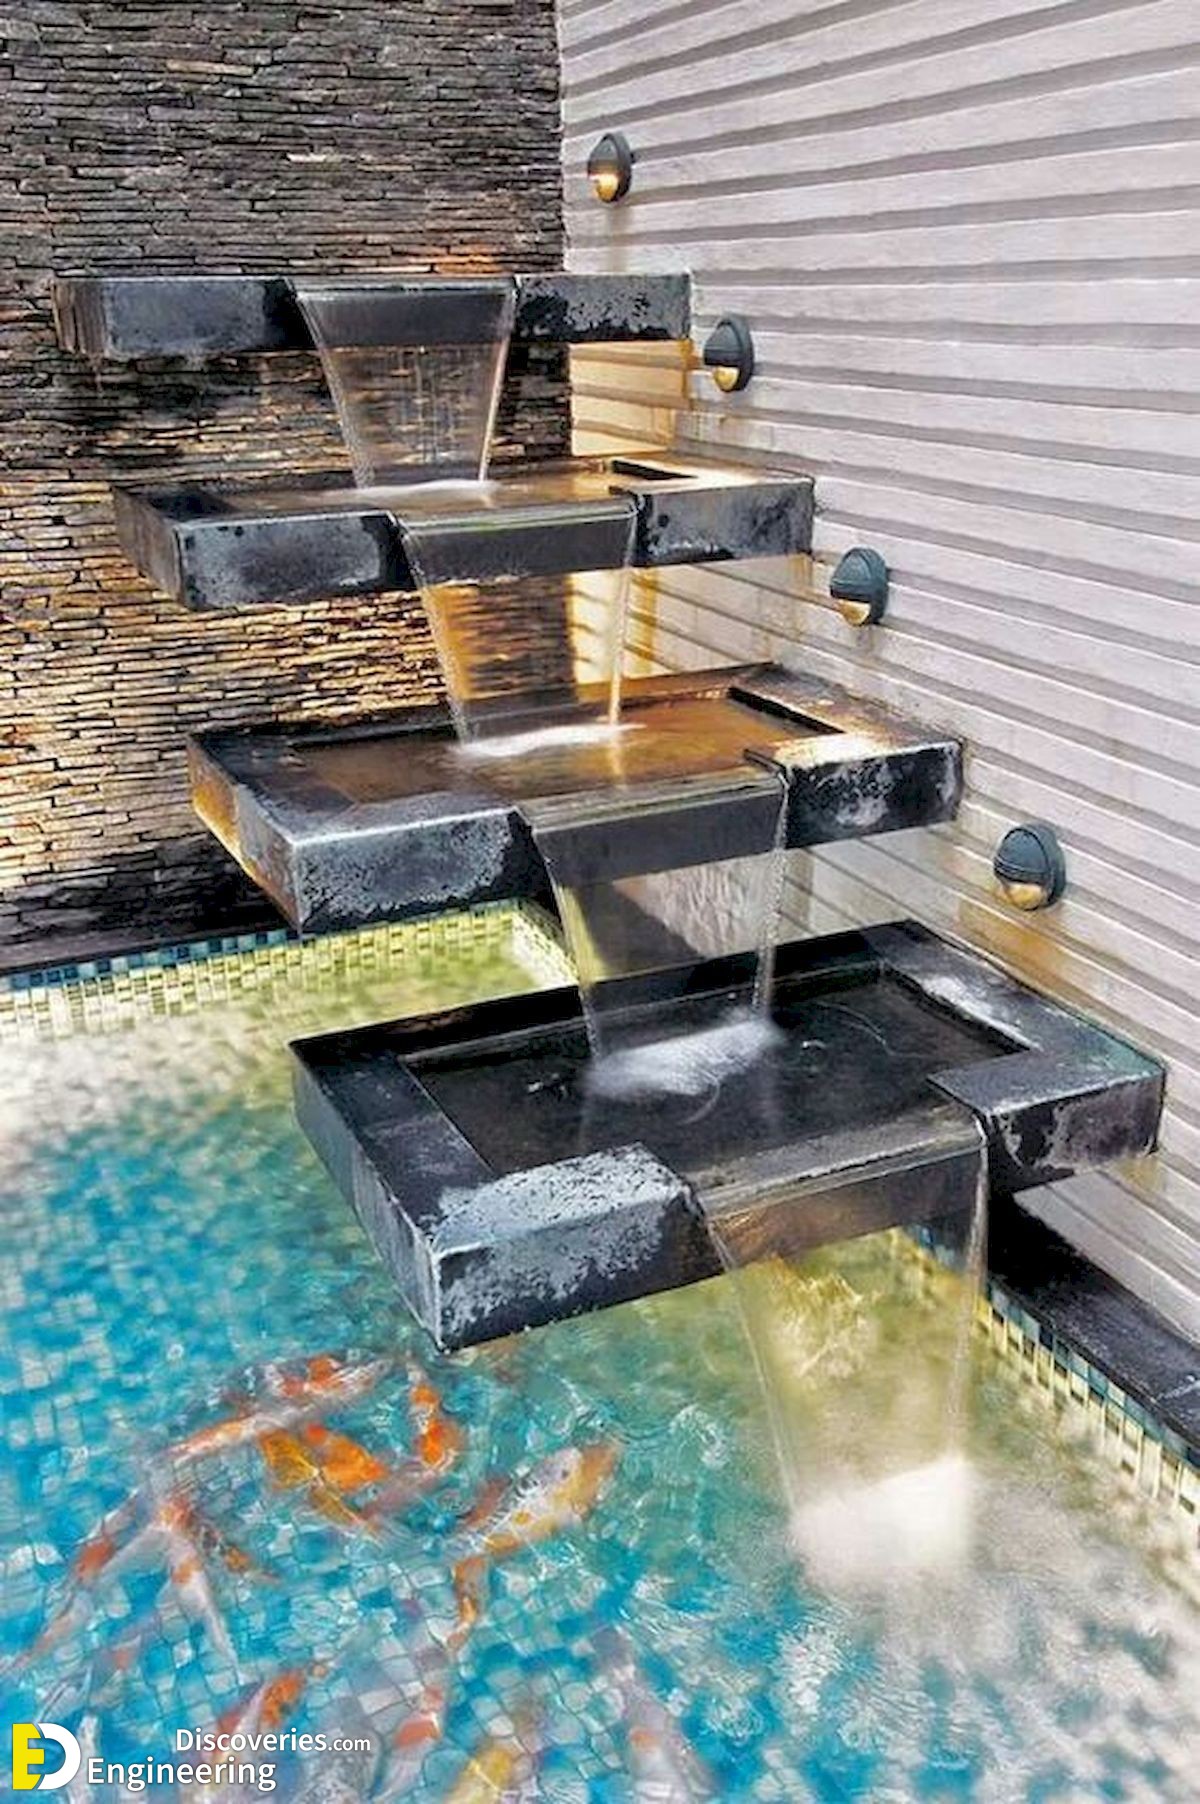 1 engineering discoveries amazing water fountain ideas to transform your home into a serene oasis